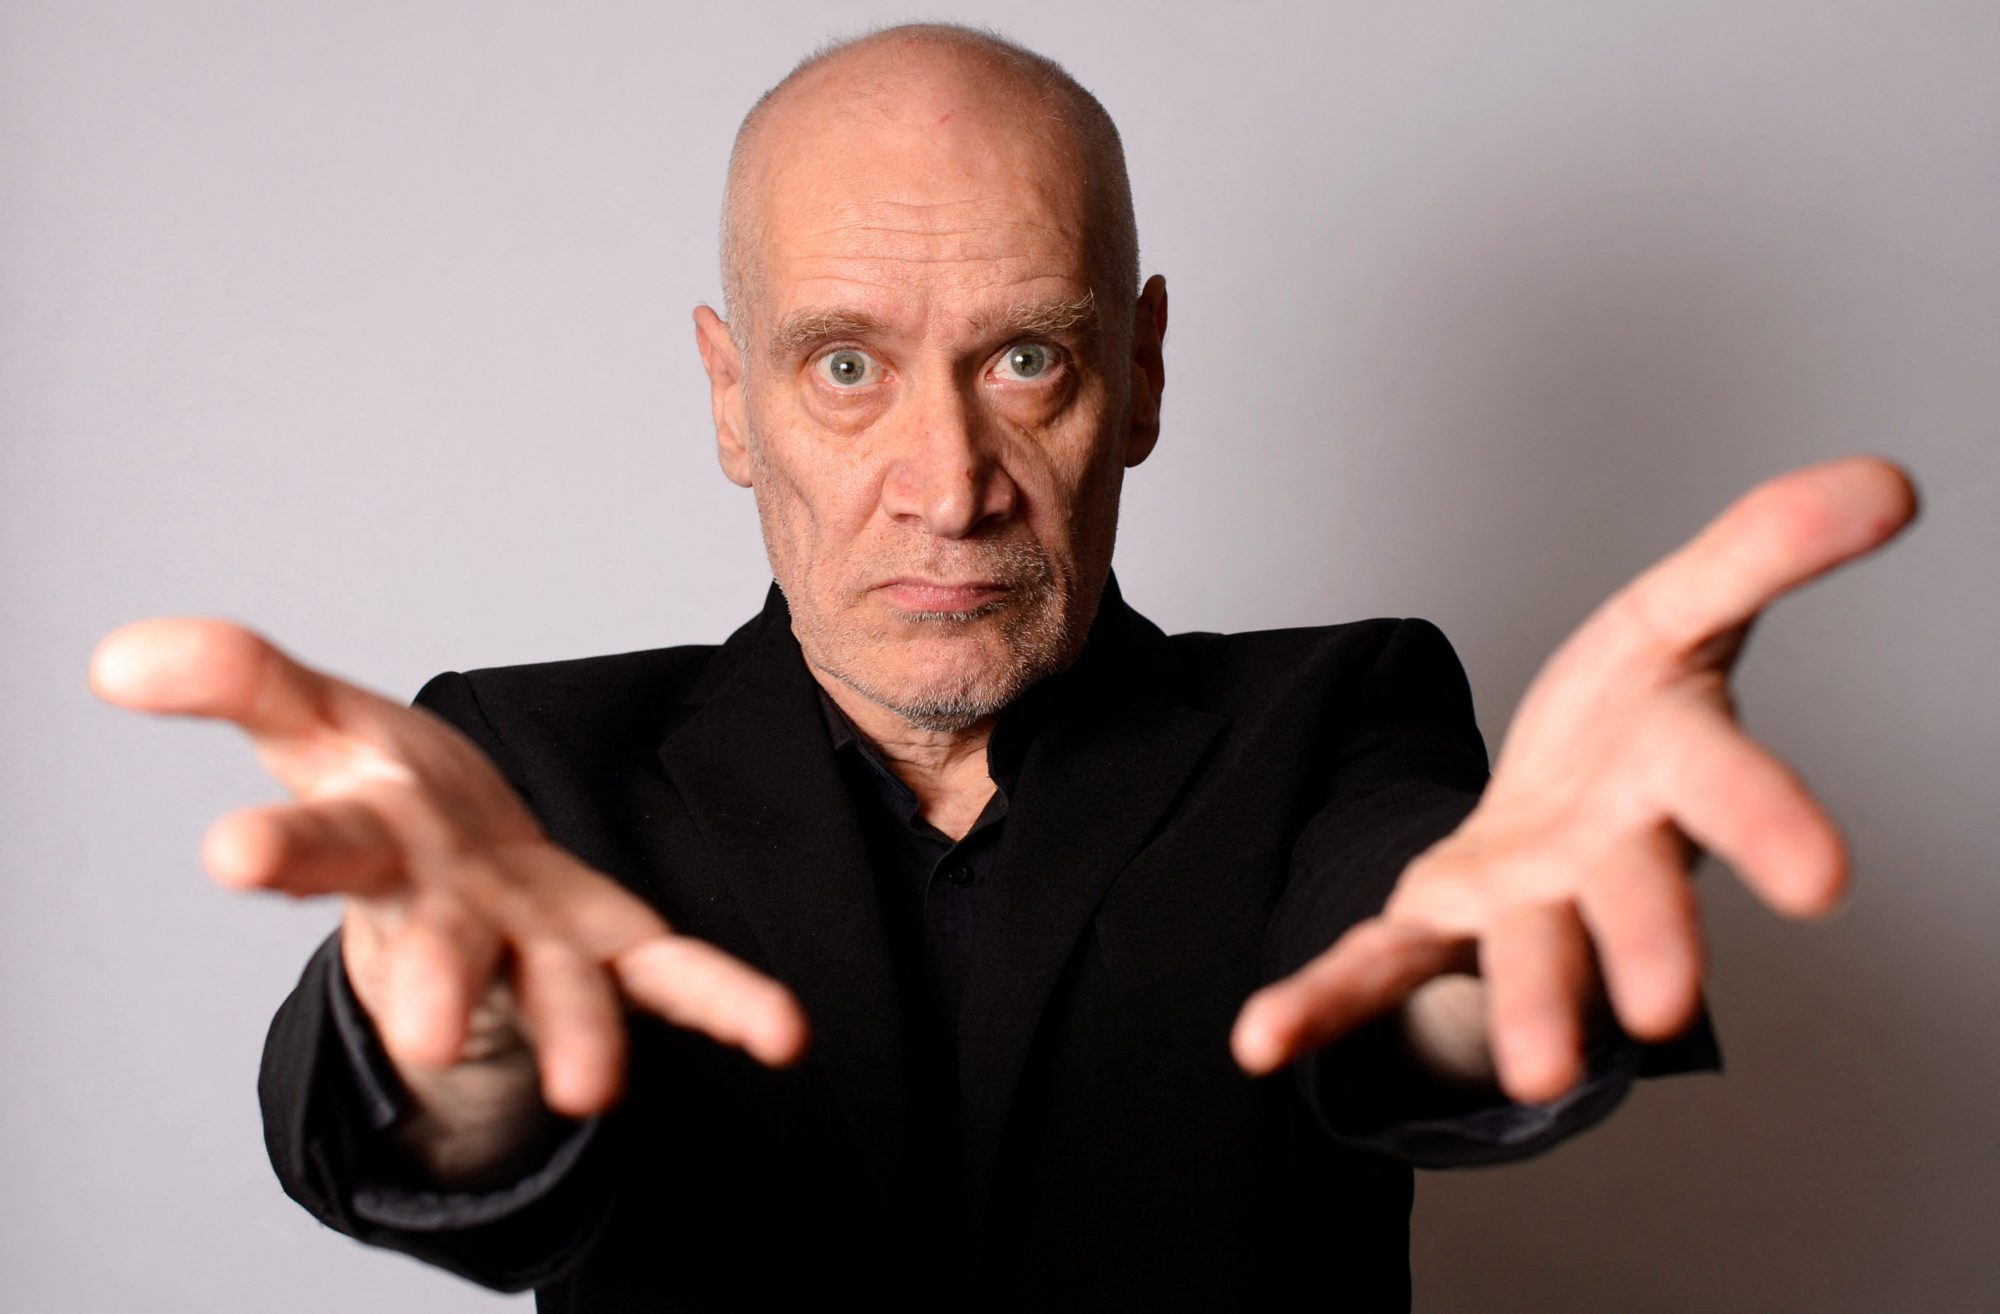 FILE PHOTO: Musician Wilko Johnson poses for a photograph at his home in Westcliff - on- sea, Essex, southern England in 2013.   REUTERS/Paul Hackett/File Photo